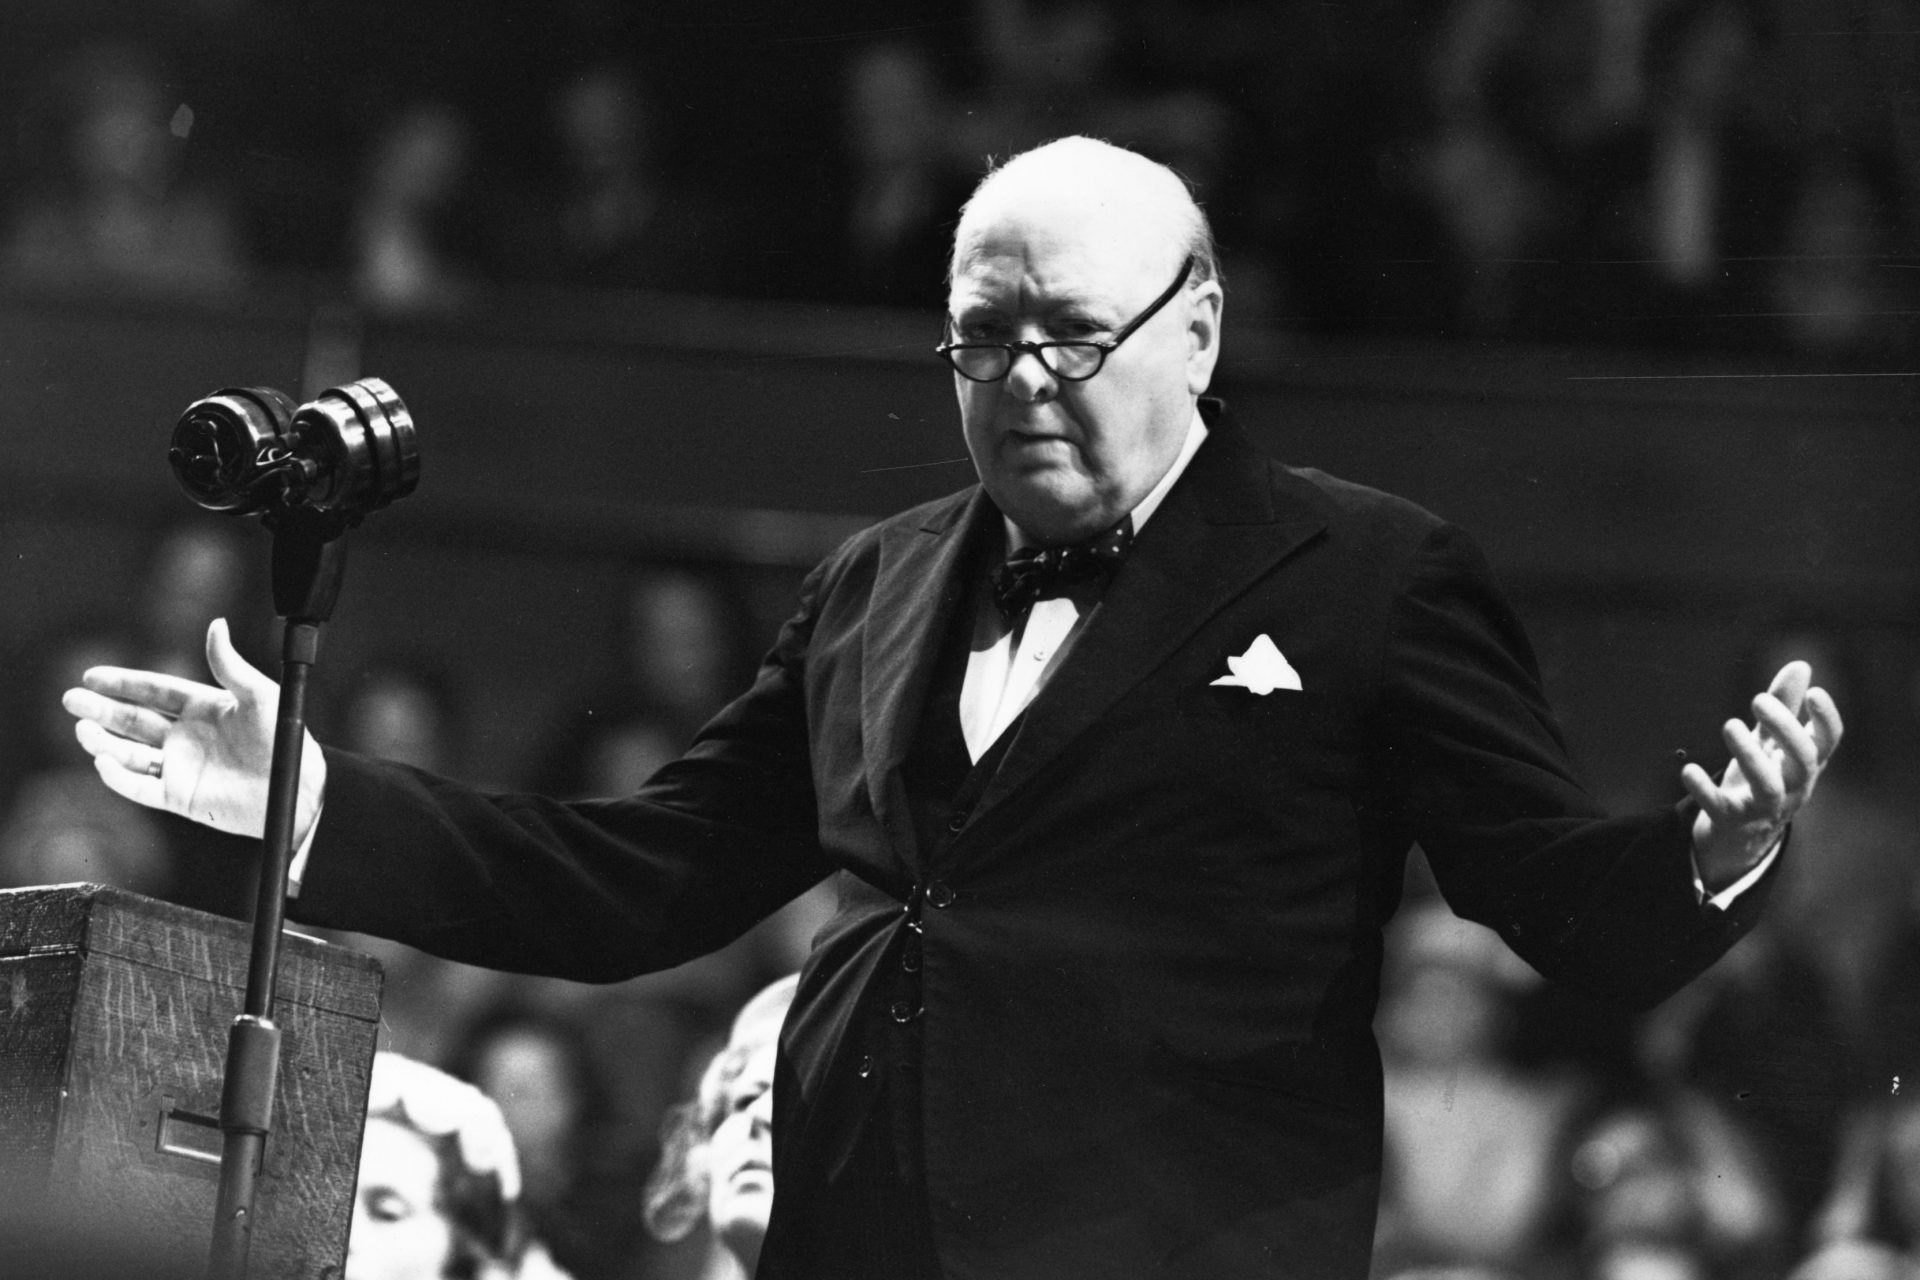 <p>On January 15, 1965, Winston Churchill suffered a stroke. The former British Prime Minister was ill for the next nine days and finally let out his last breath on January 24. His last words would have been: "I'm so bored with it all", as reported by Thomas Snégaroff in his work 'Le fin mot de l'Histoire'.</p> <p><a href="https://www.msn.com/en-us/channel/source/Showbizz%20Daily%20English/sr-vid-w8hcuhvu3f8qr5wn5rk8xhsu5x8irqrgtxcypg4uxvn7tq9vkkfa?cvid=cddbc5c4fc9748a196a59c4cb5f3d12a&ei=7" rel="noopener">Follow Showbizz Daily to see the best stories every day</a></p>